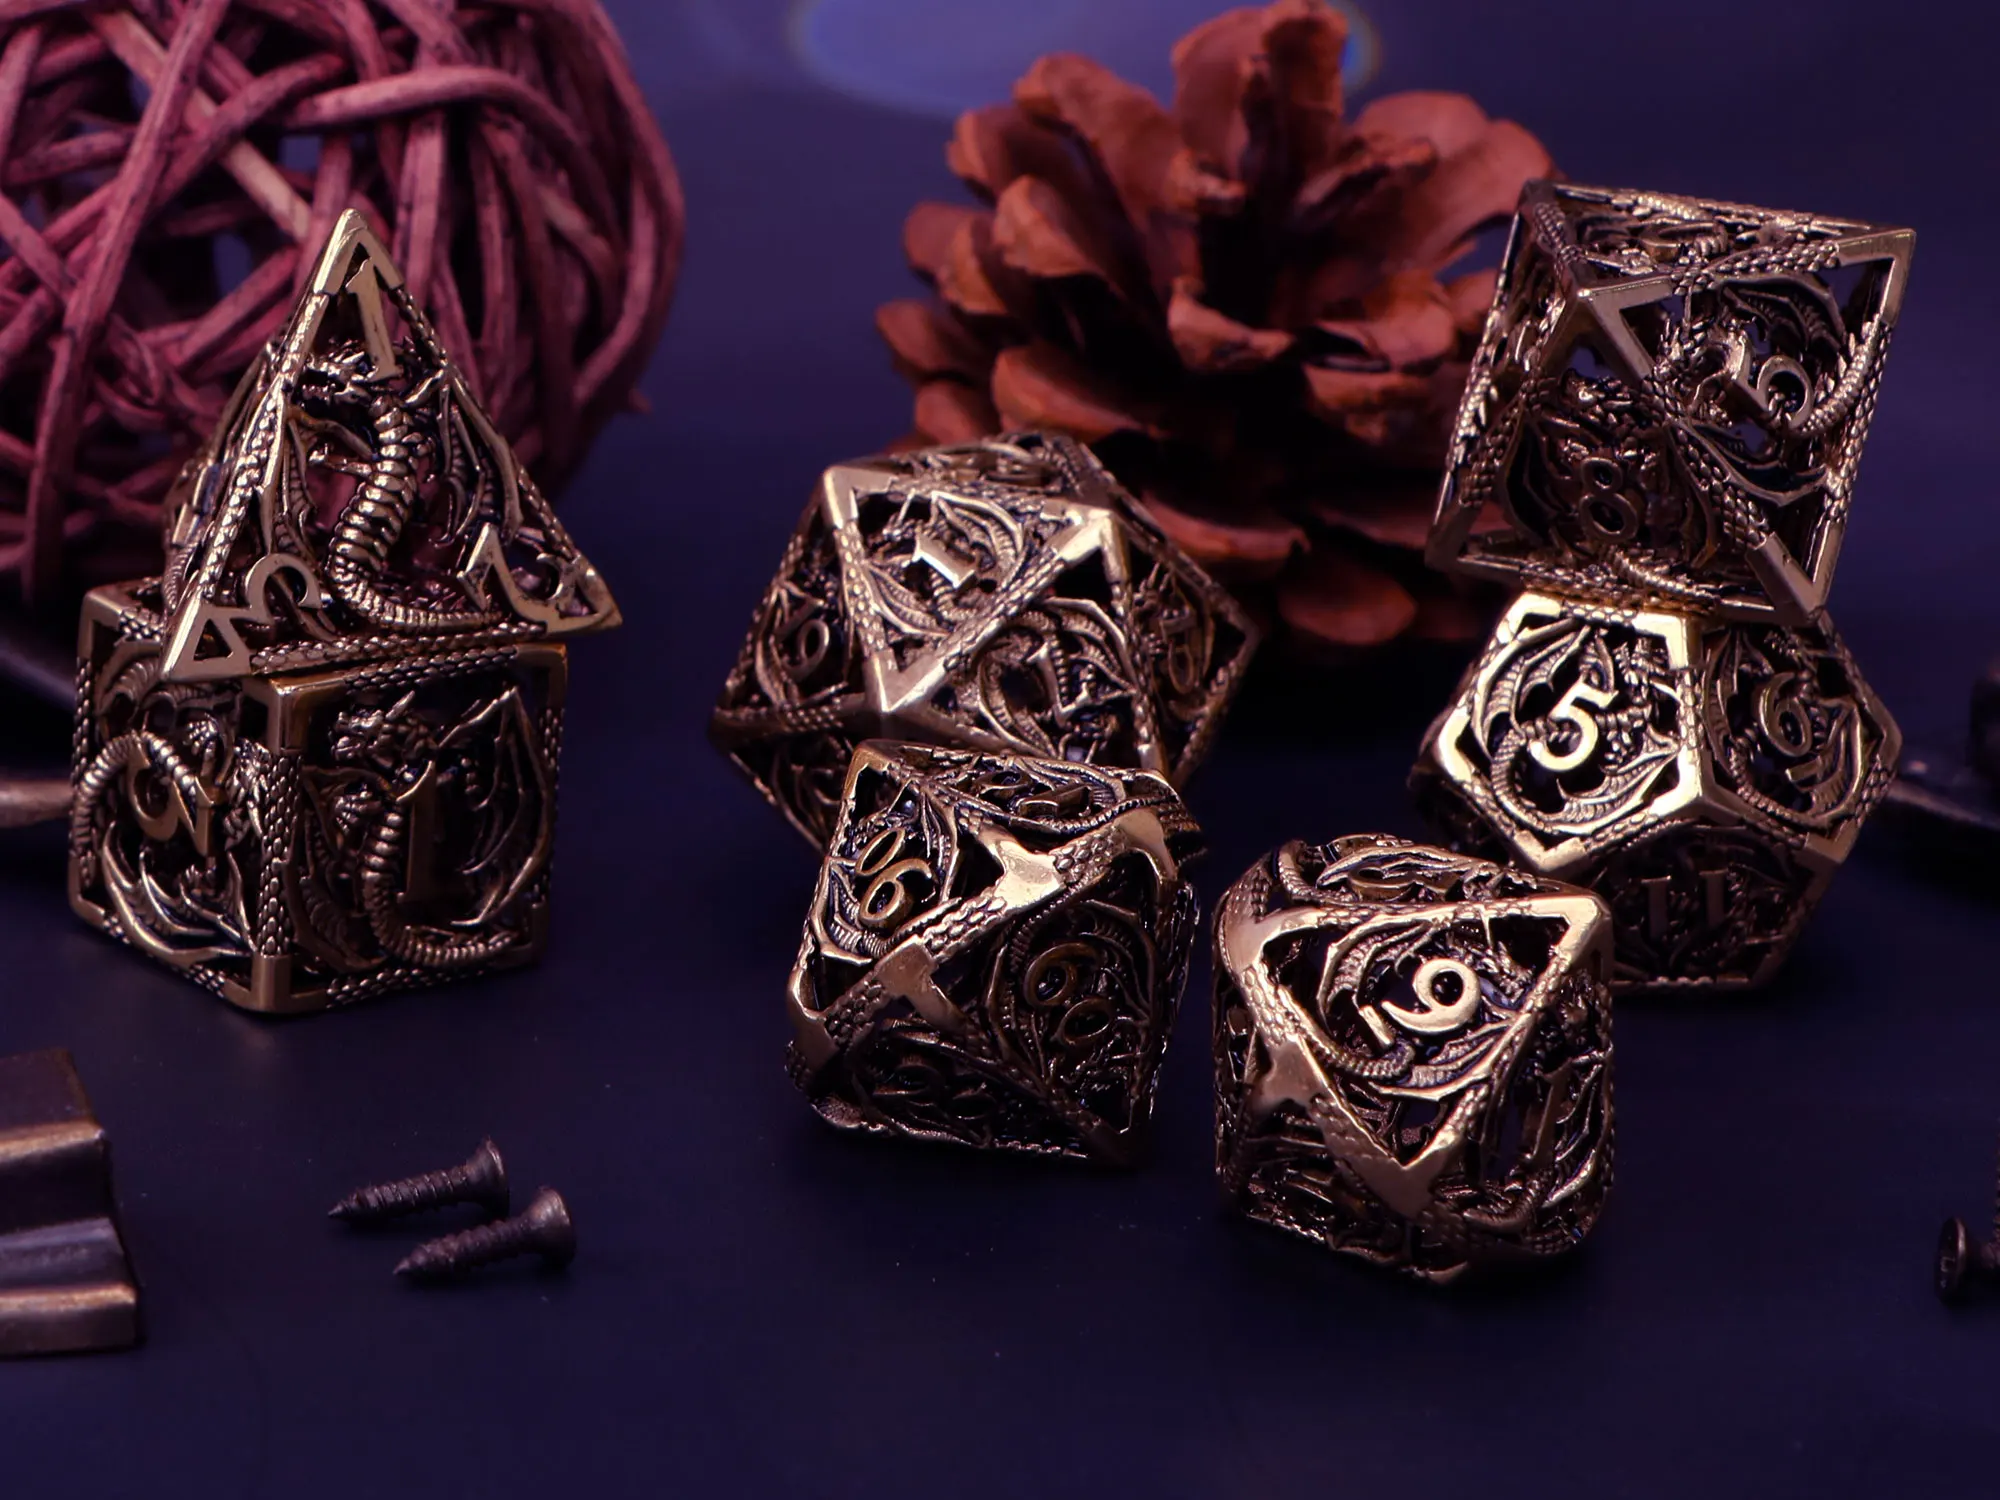 

Hollow Polyhedral Metal D&d Dice Set of Tabletop Games Dungeon and Dragon Dice Rpg Dnd Board Game Dice Box D20 D12 D10 D8 D6 D4